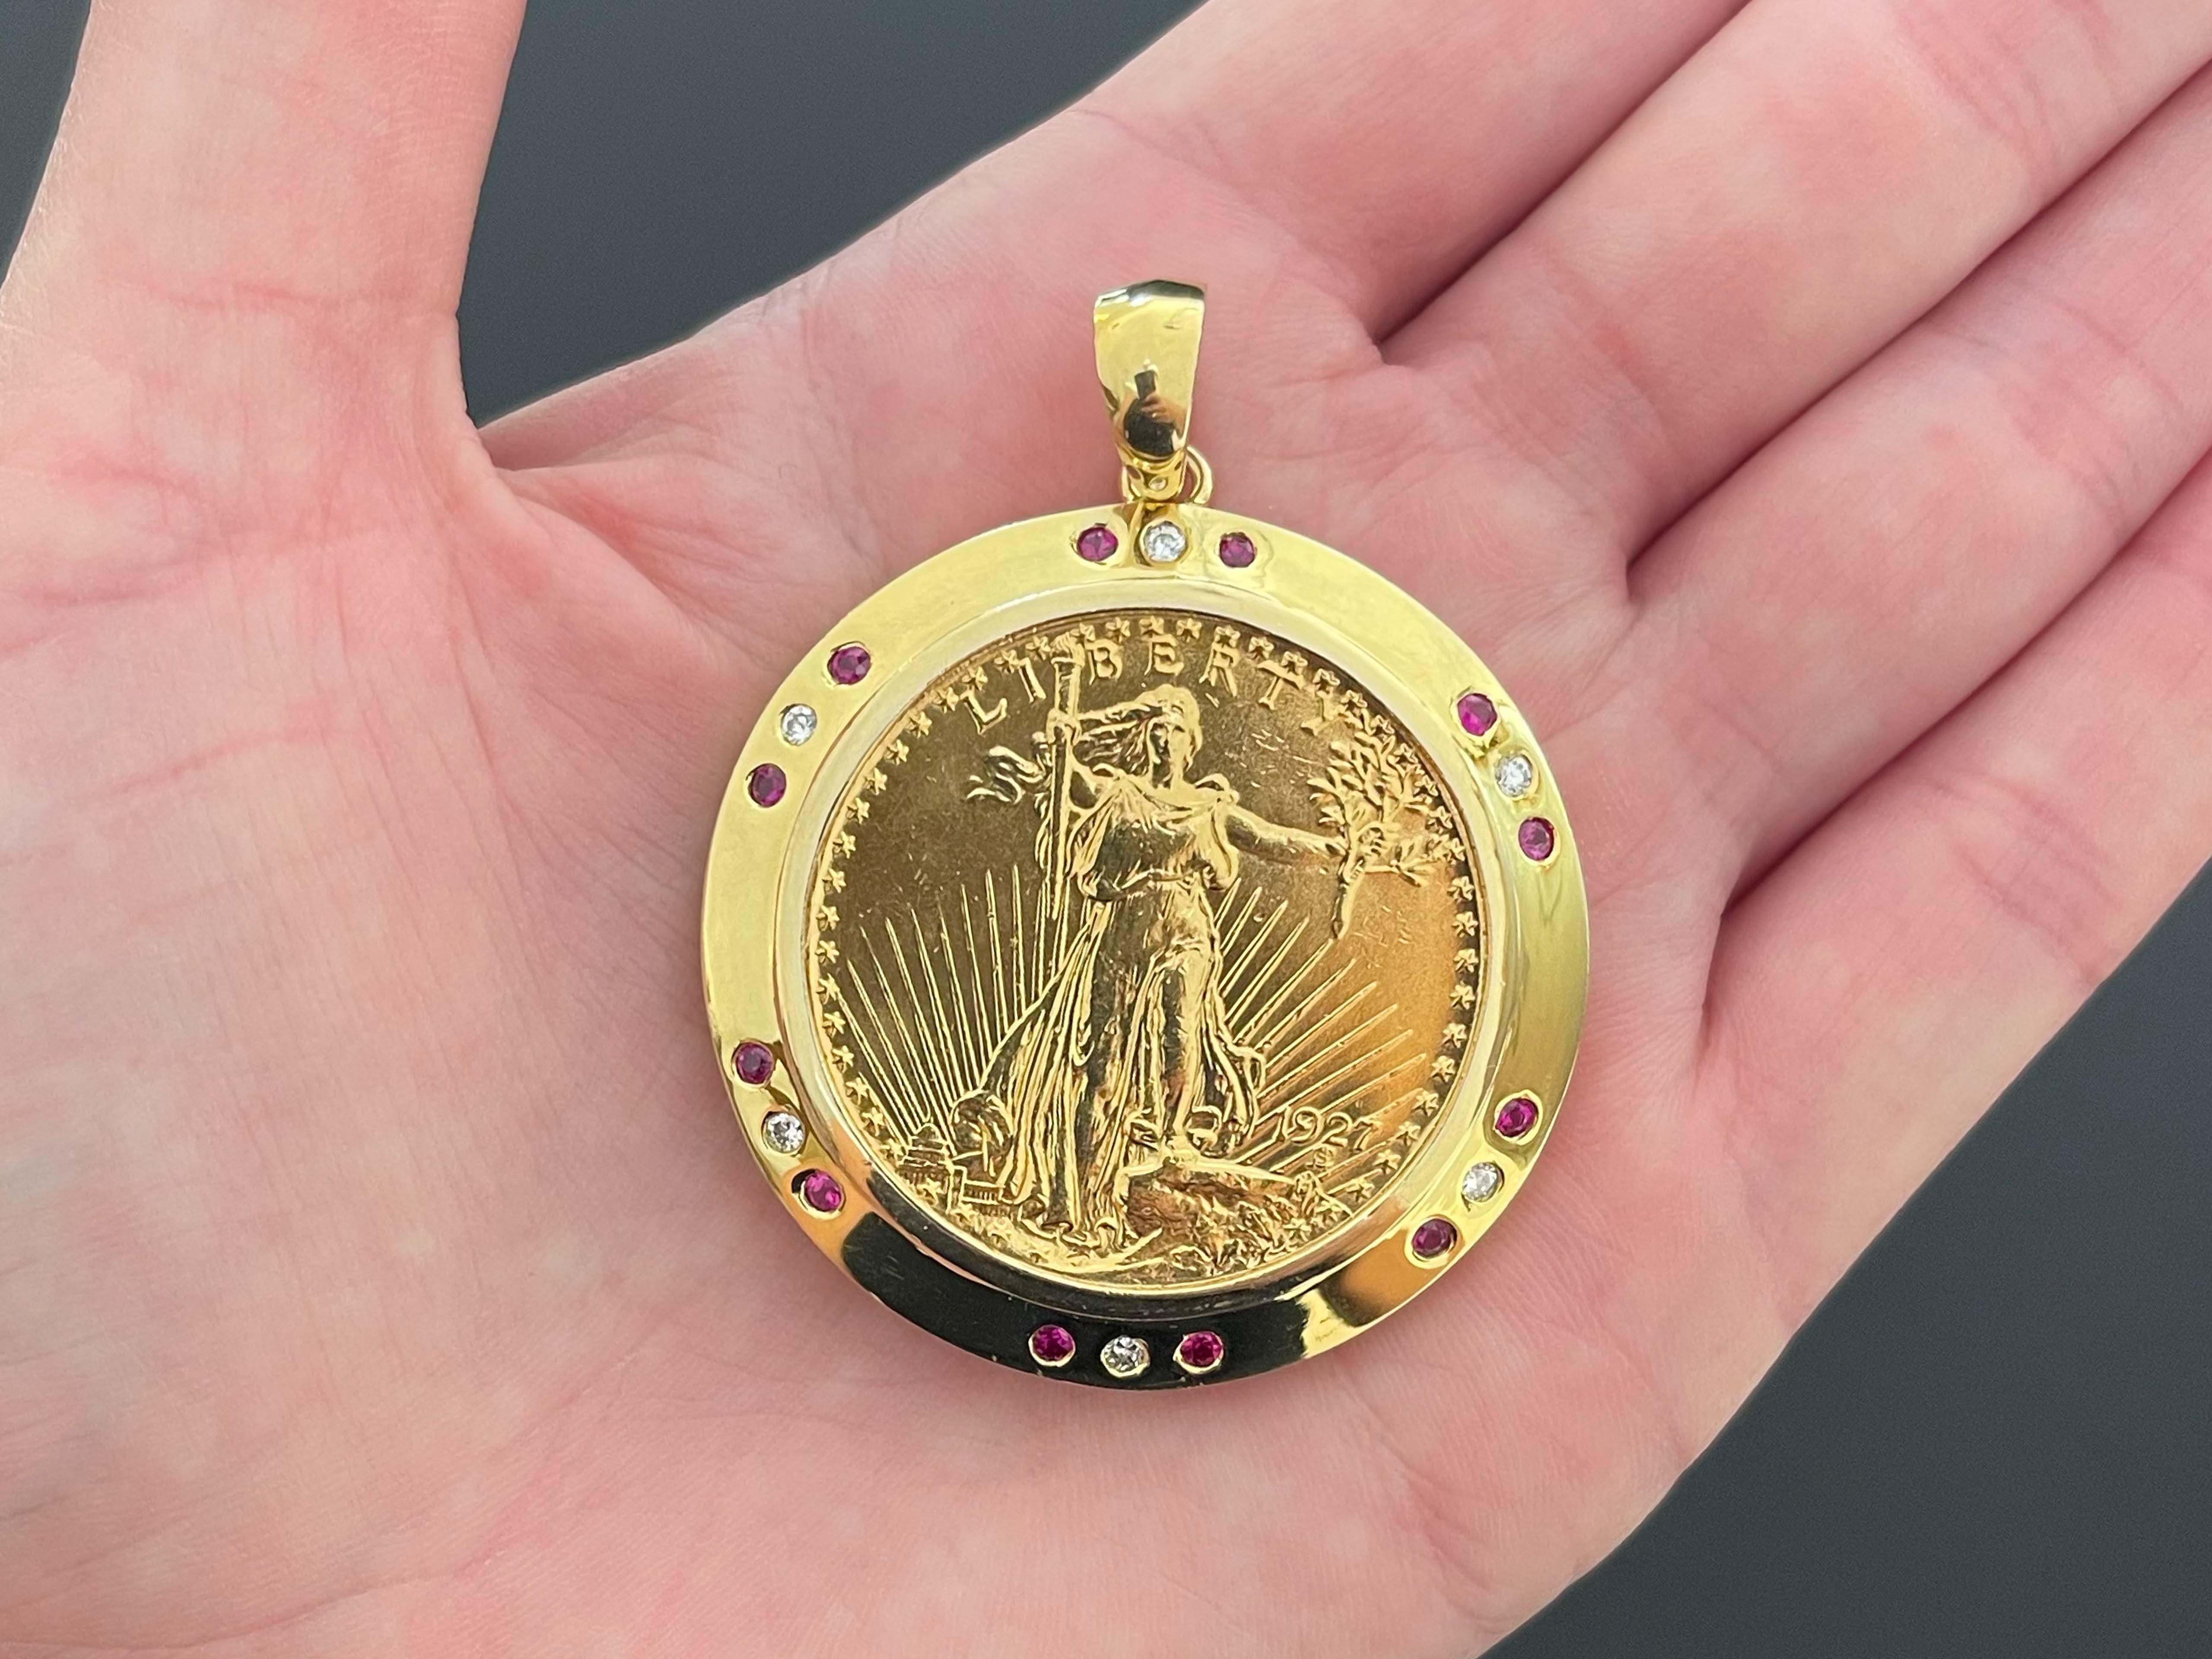 This pendant contains one $20 American Eagle gold coin with 0.9675 ounce of pure gold. The coin is set in a 14K gold diamond ruby bezel. The pendant is 1.75